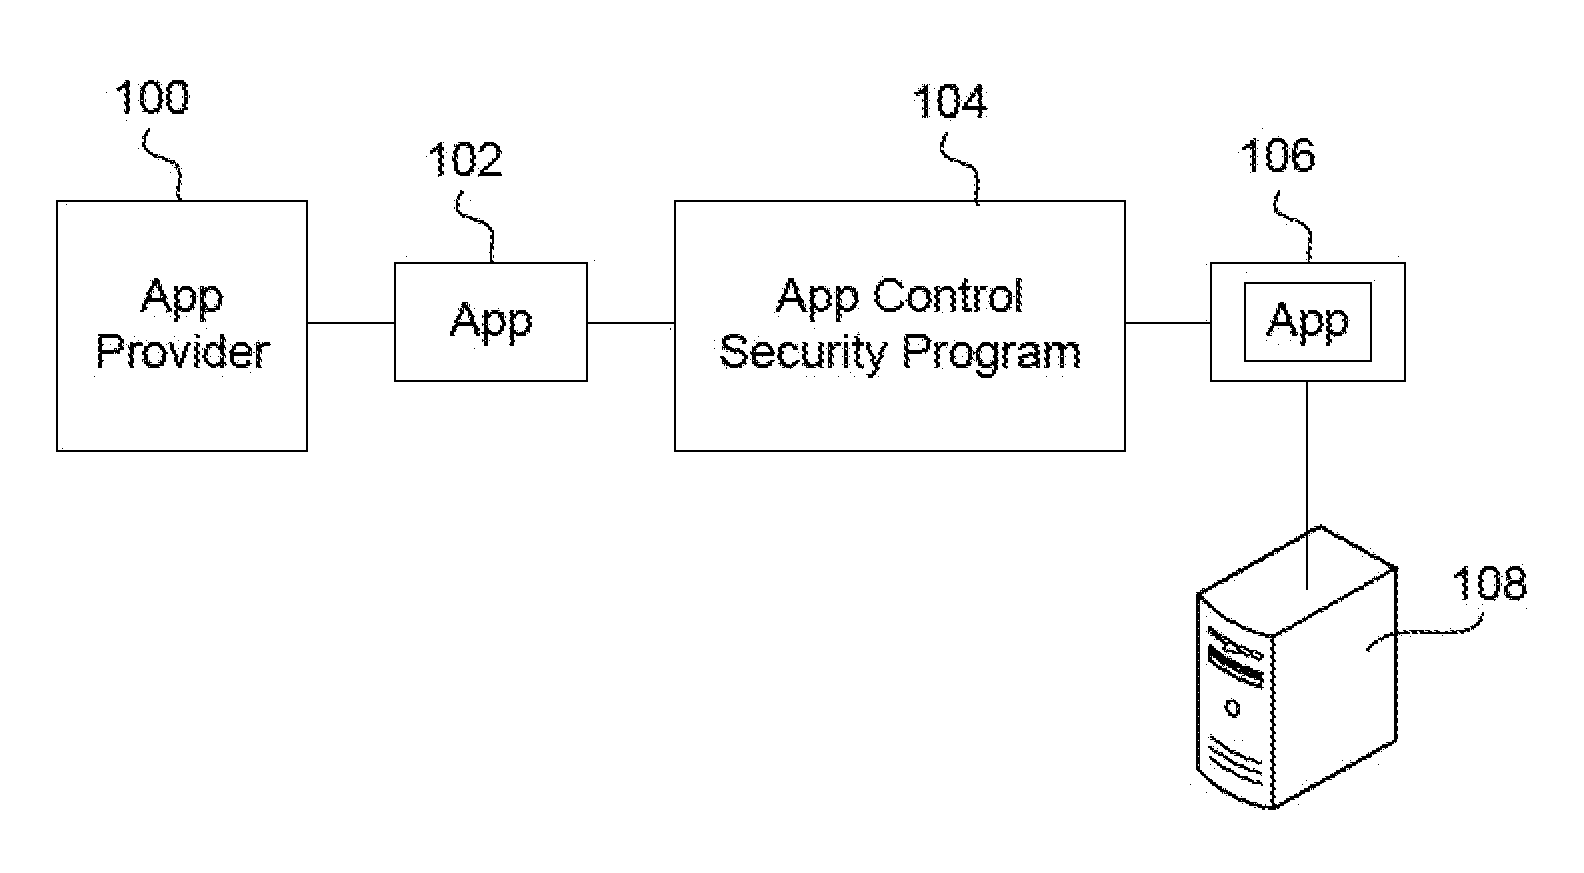 Ensuring network connection security between a wrapped app and a remote server